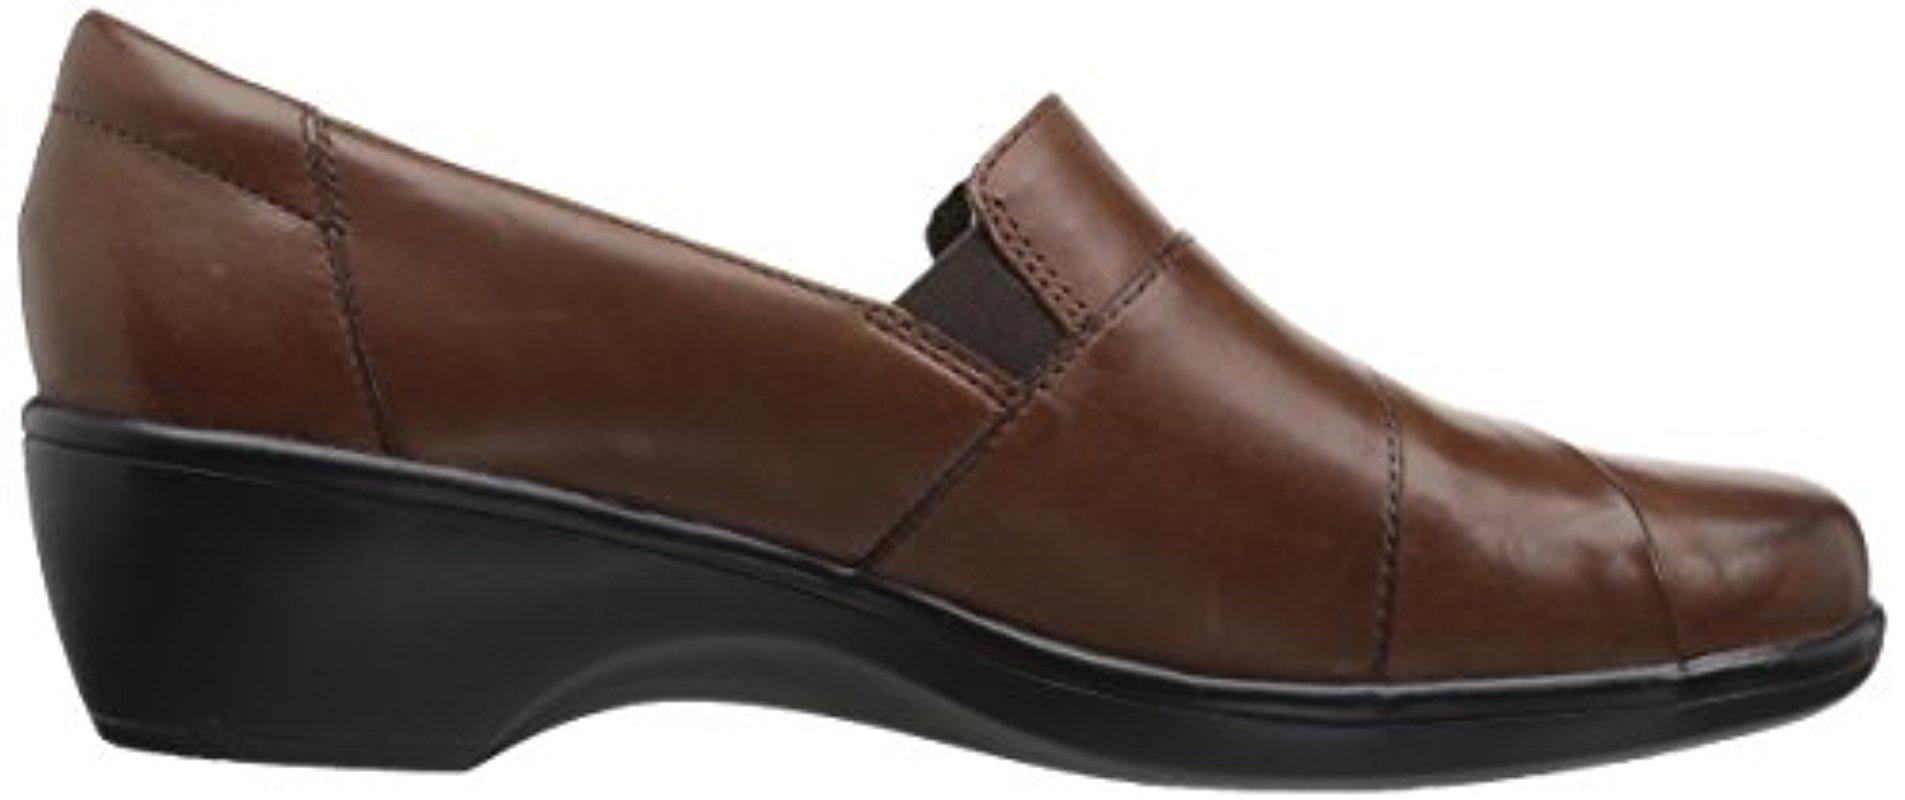 Clarks Leather May Marigold Slip-on Loafer Brown | Lyst